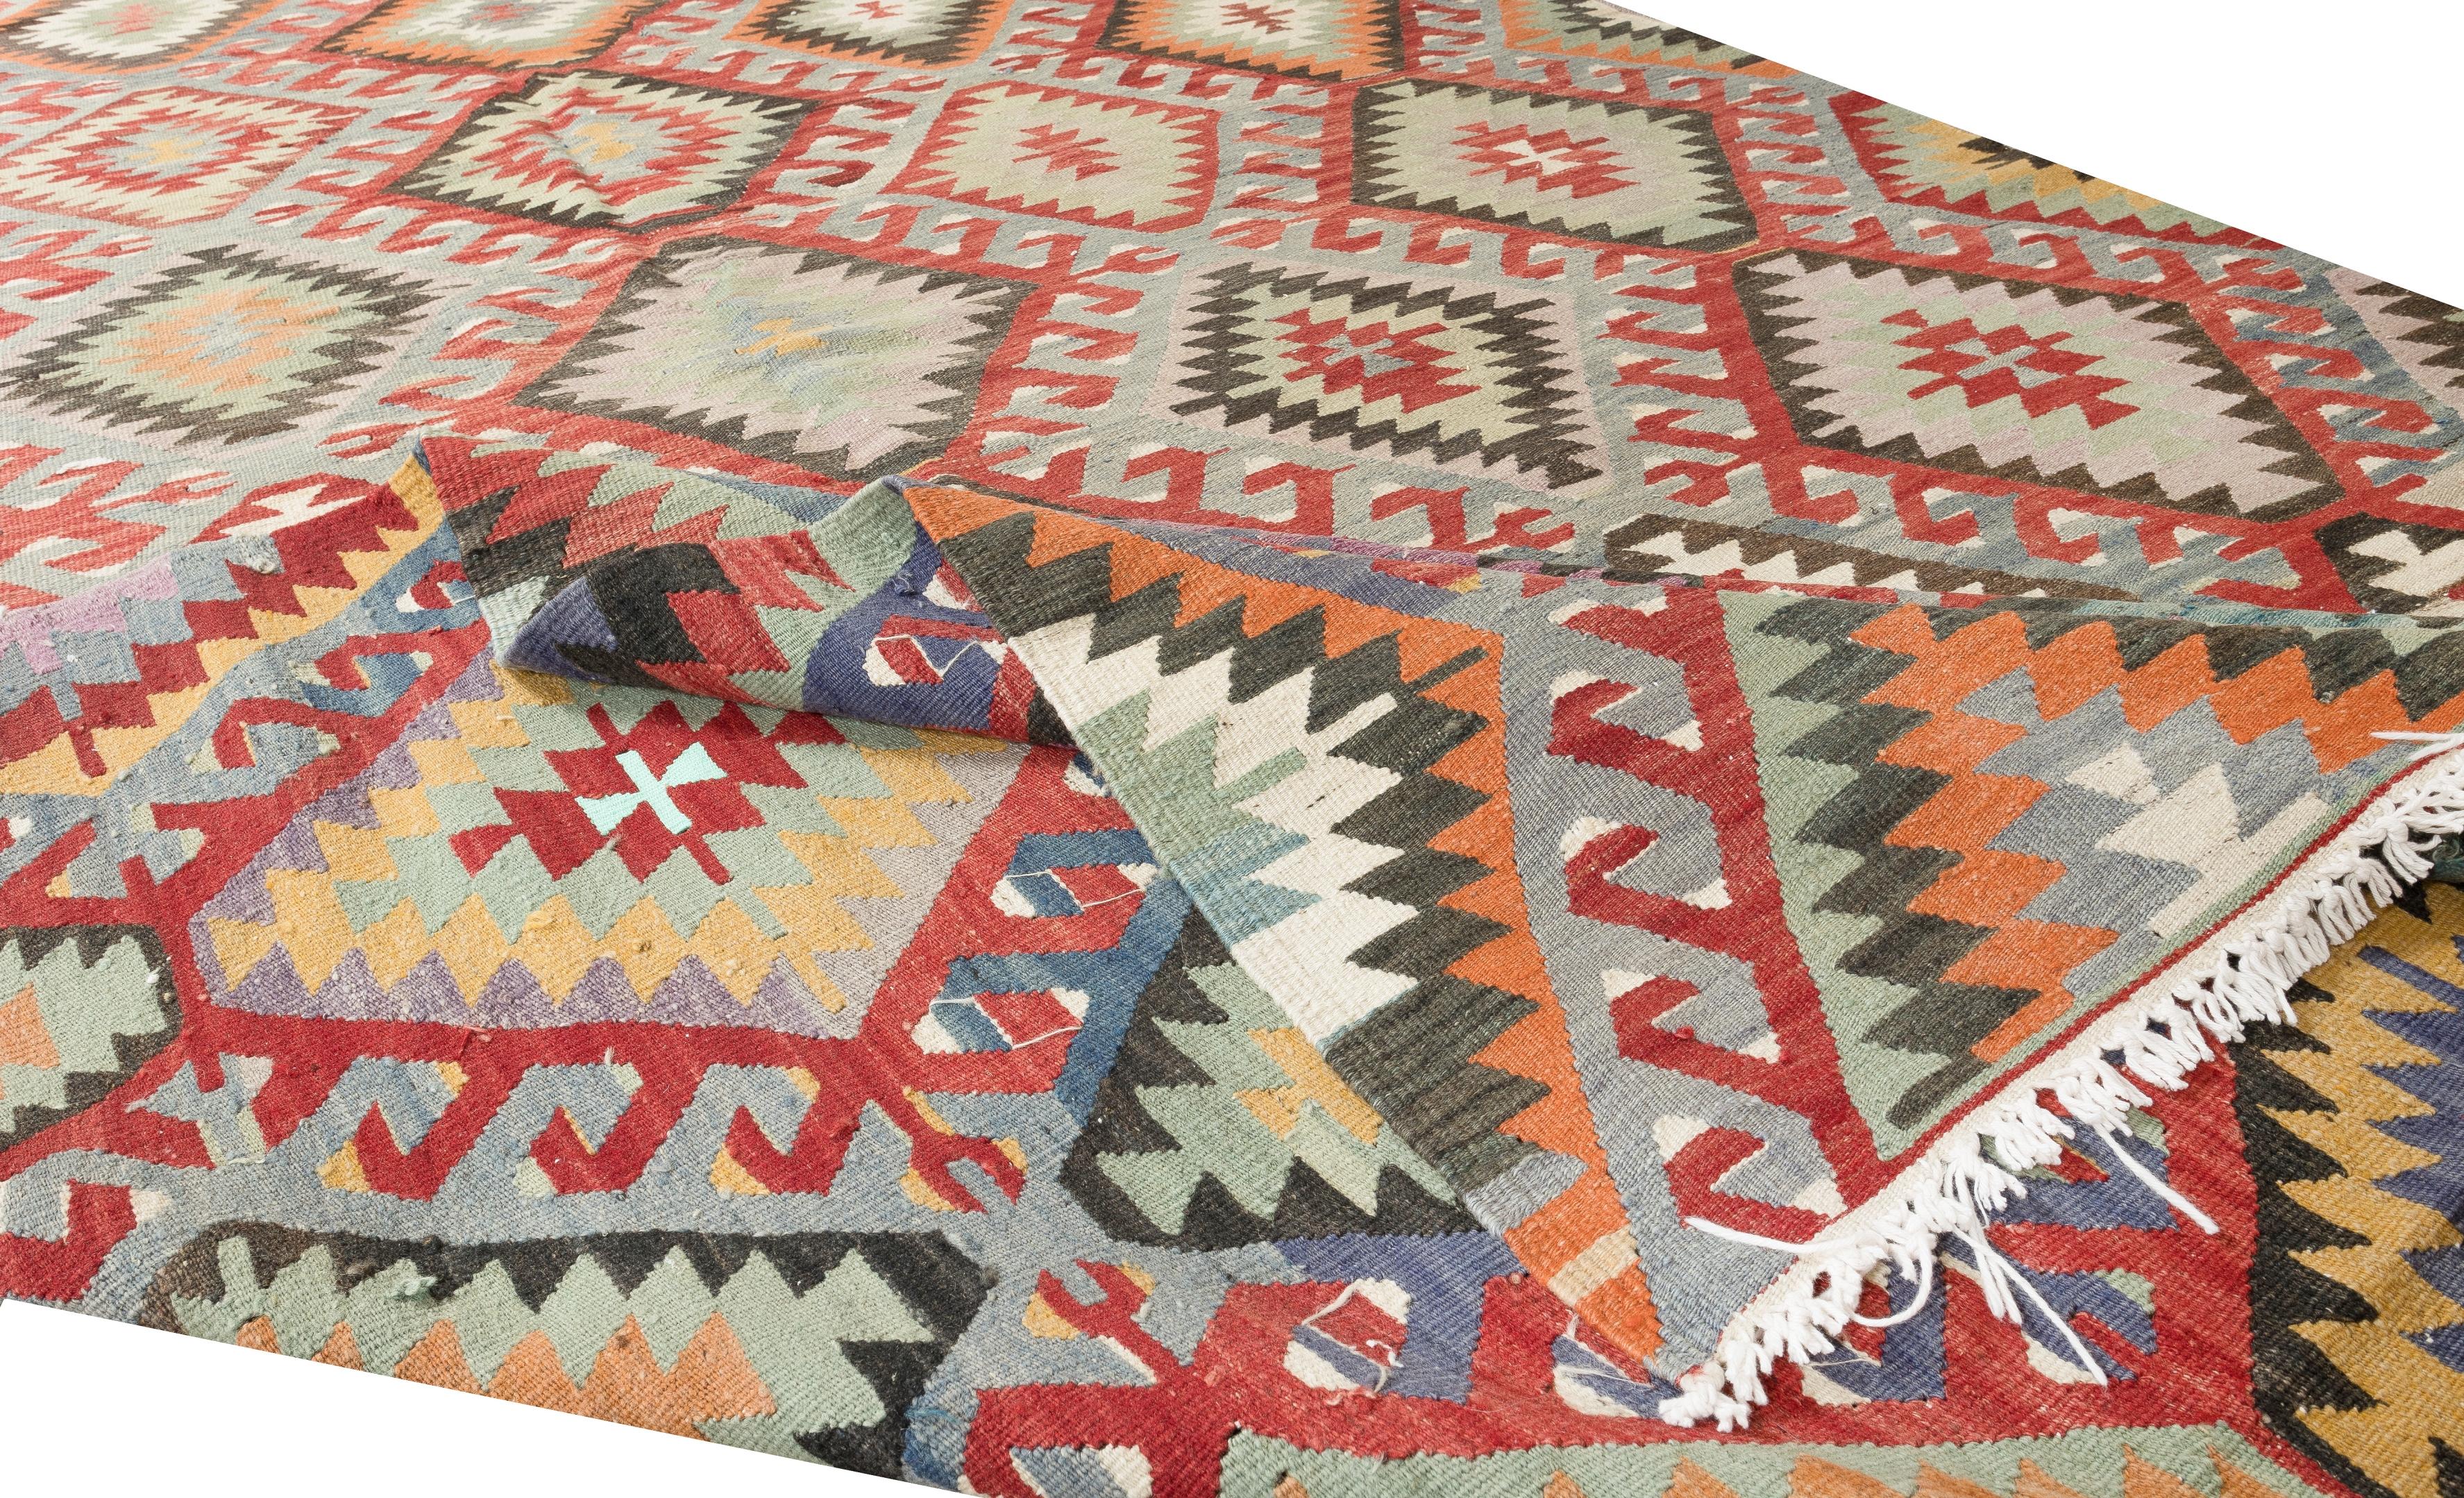 Hand-Woven 5.8x10 Ft One of a Kind Handmade Turkish Wool Kilim, Multicolored Flat-Weave Rug For Sale